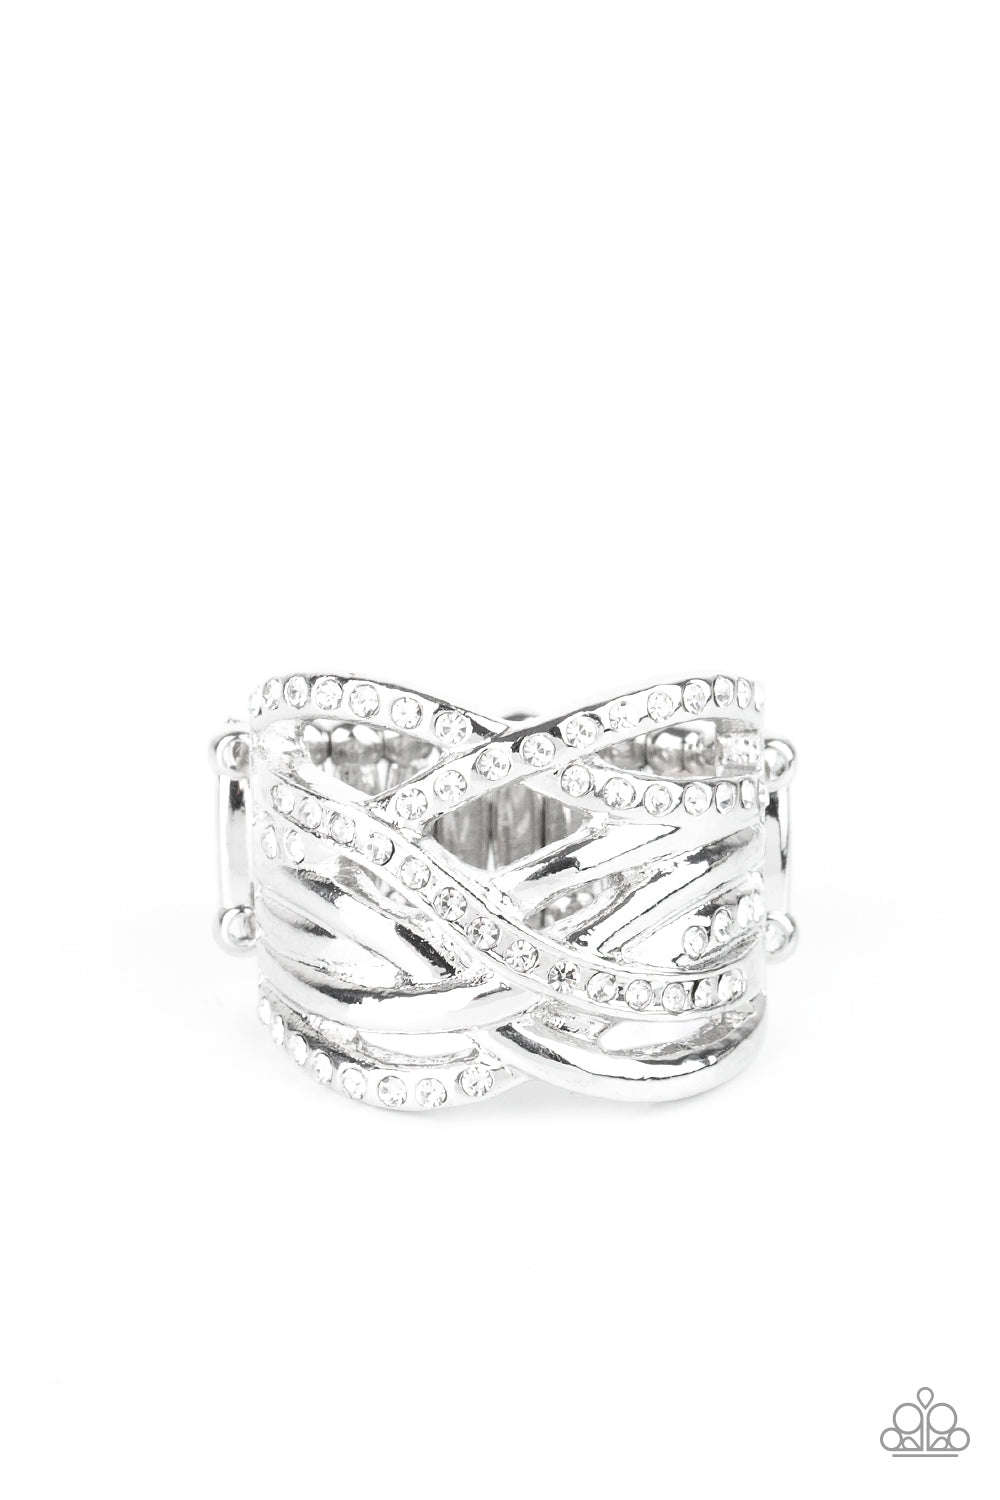 High Rollin' - White - Paparazzi - Encrusted in sporadic rows of glittery white rhinestones, glistening silver bars race across the finger, creating stacked shimmer. Features a stretchy band for a flexible fit.